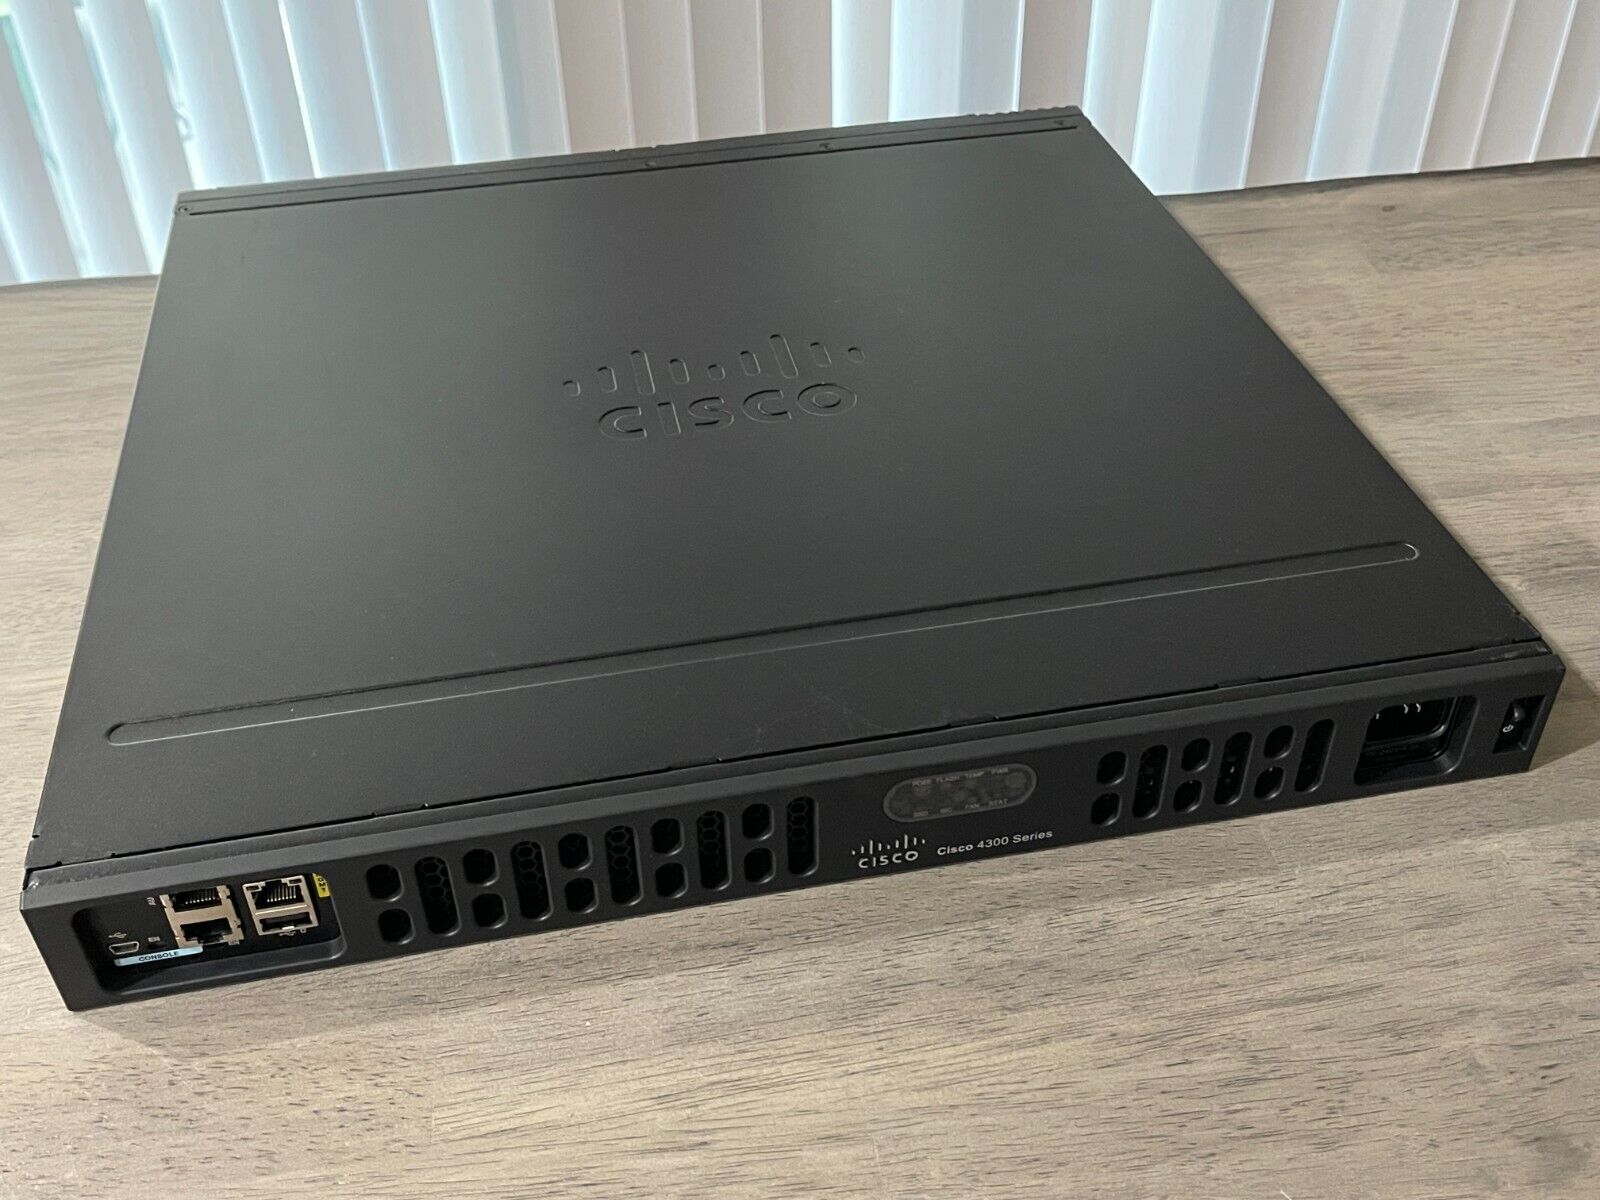 CISCO 4300 SERIES. ISR4331 ISR4331/K9 V05 4331 Integrated Services Router